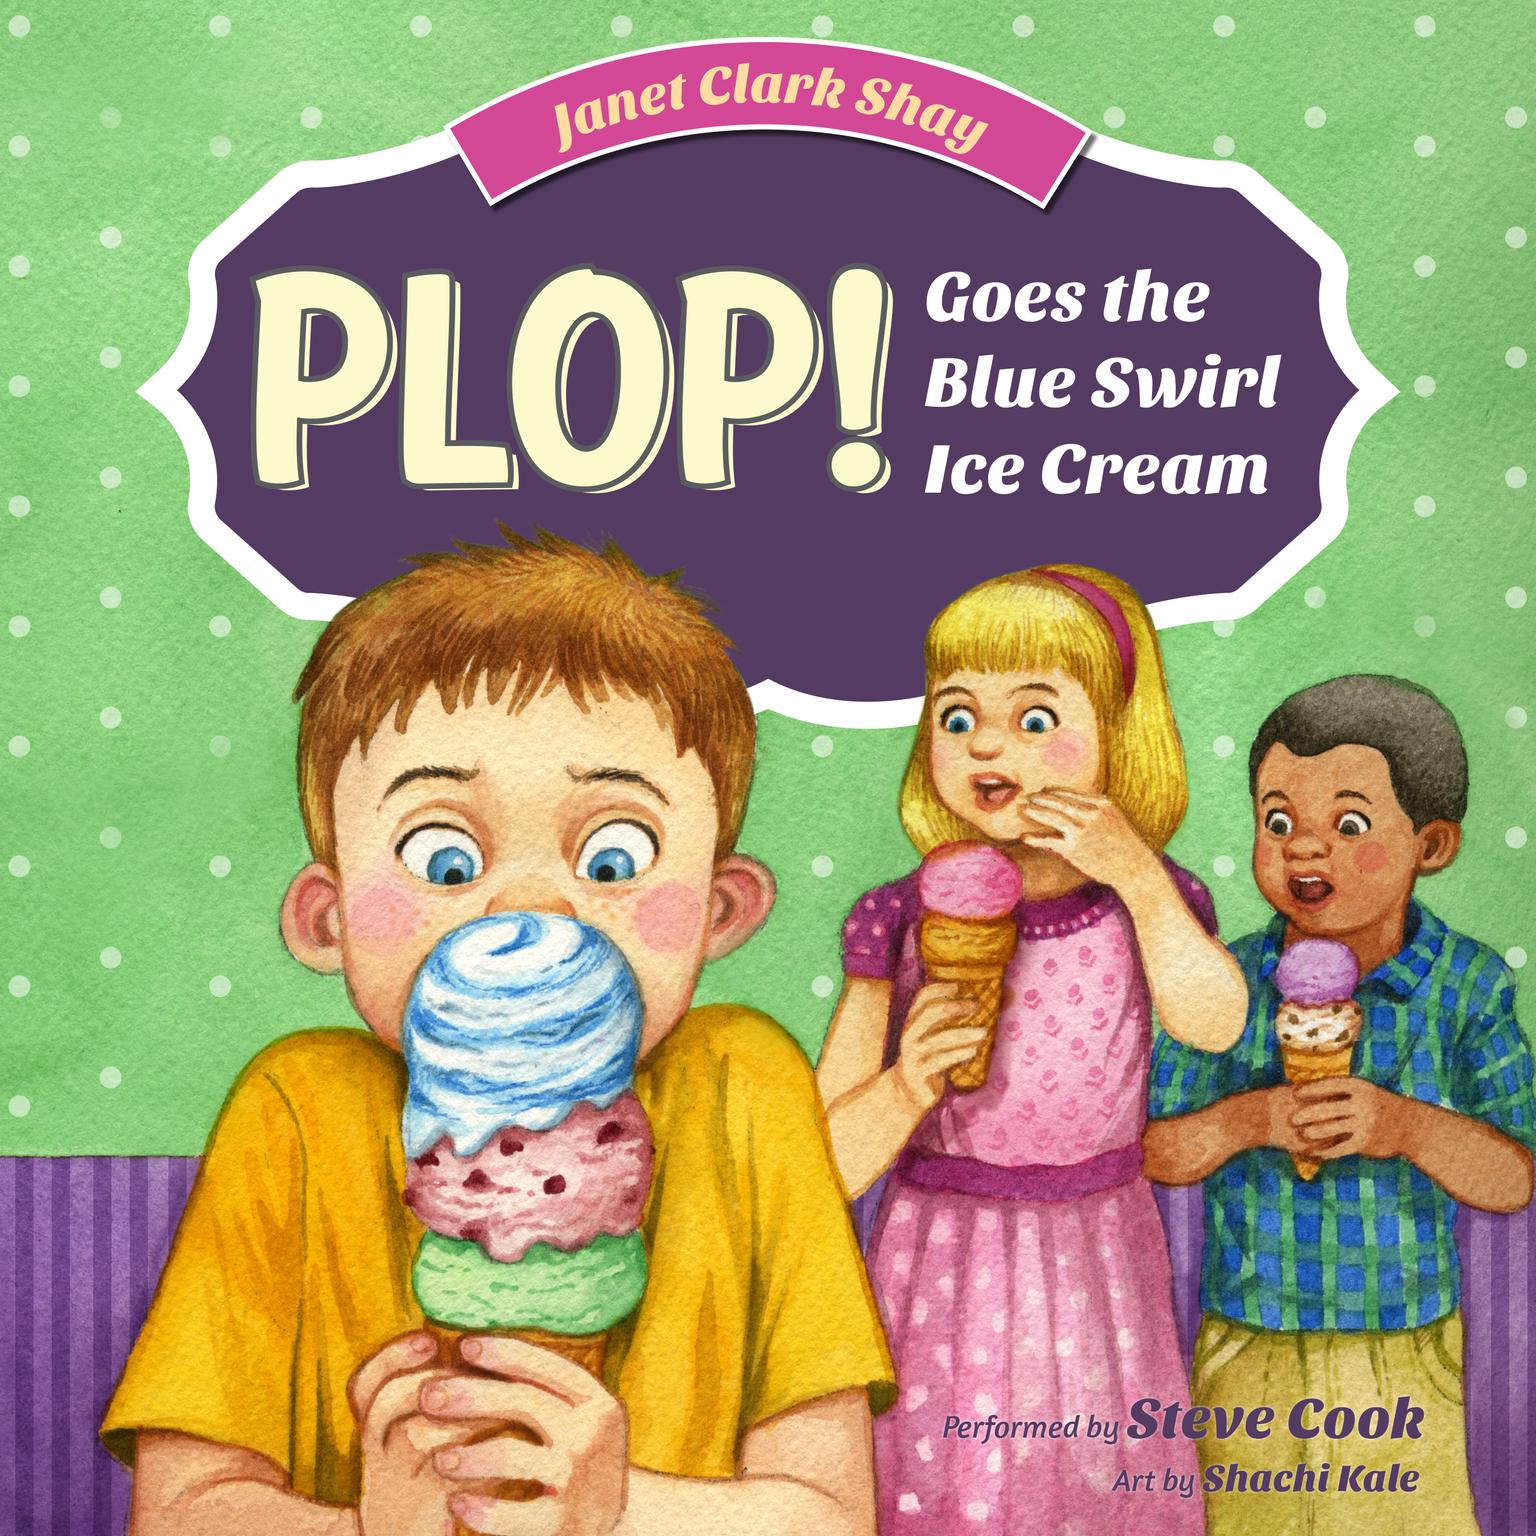 Plop! Goes the Blue Swirl Ice Cream Audiobook, by Janet Clark Shay